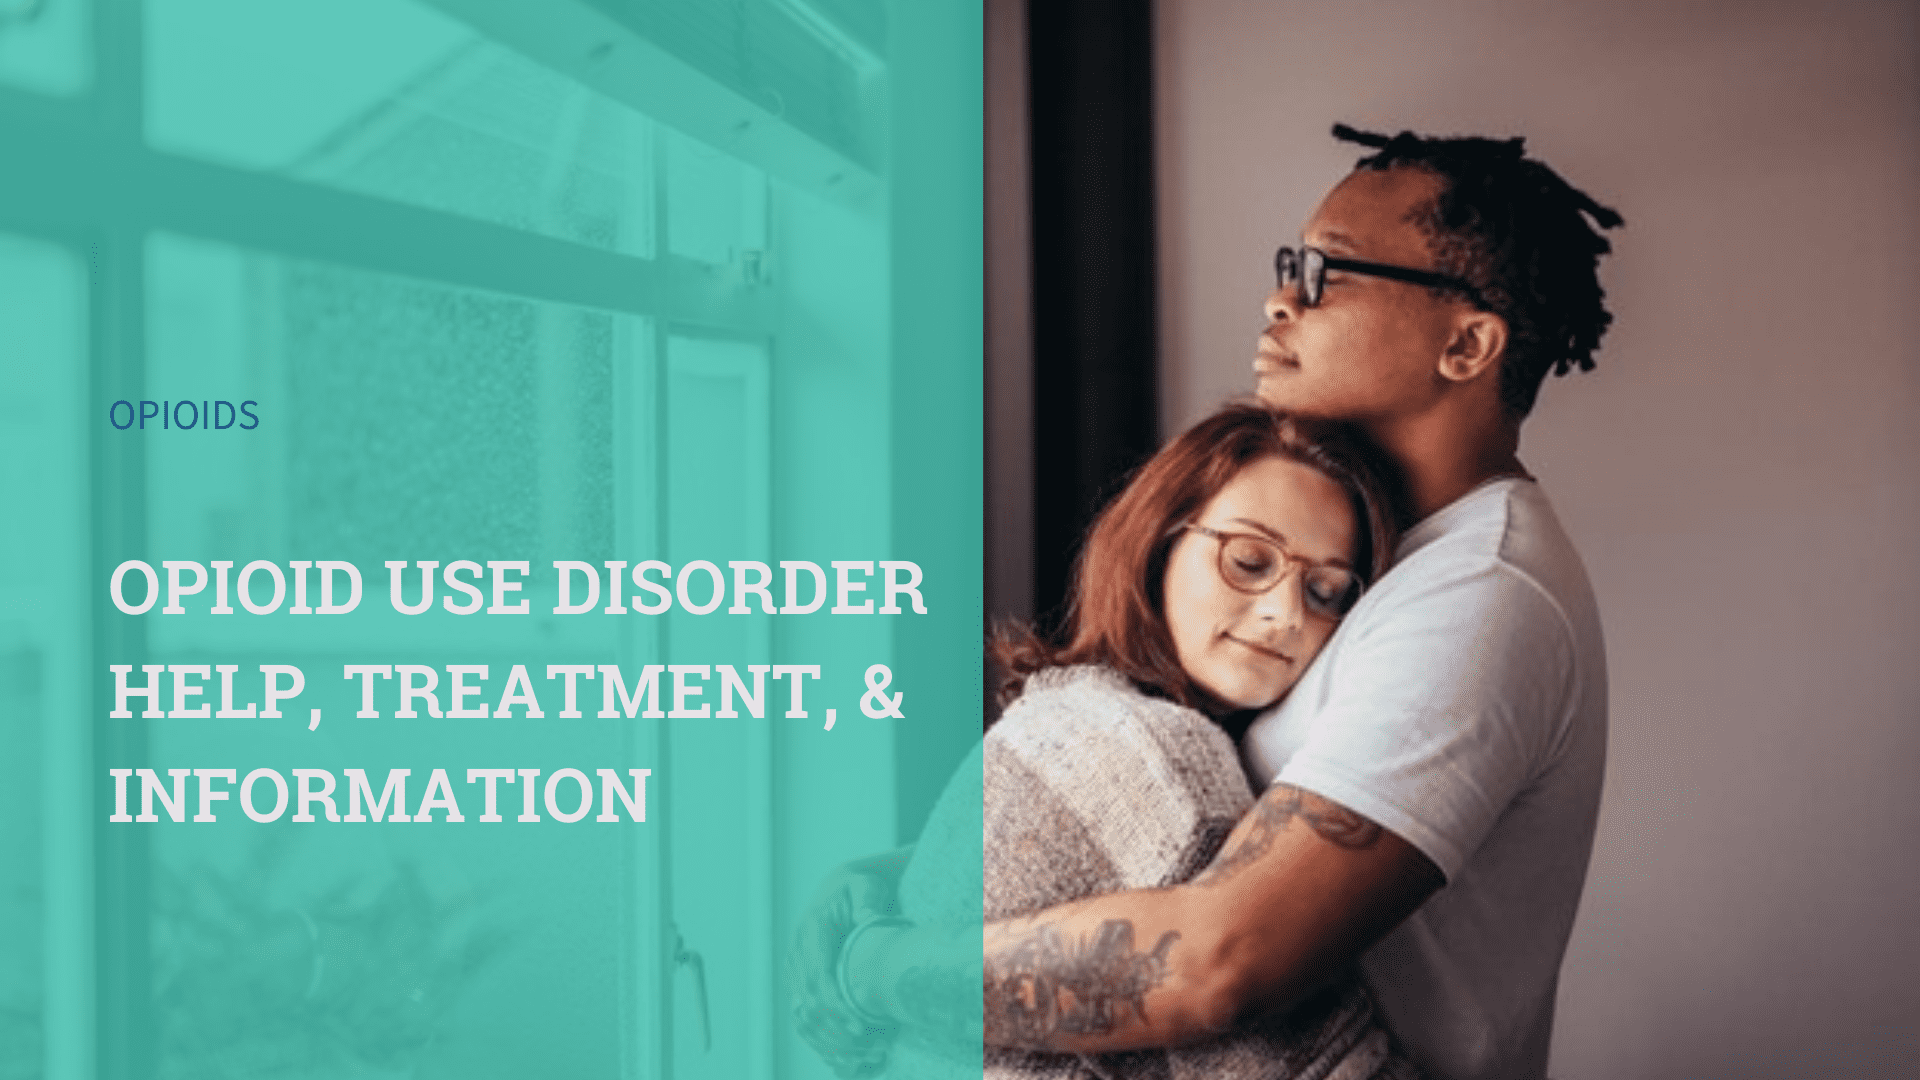 Opioid Use Disorder Help, Treatment, & Information